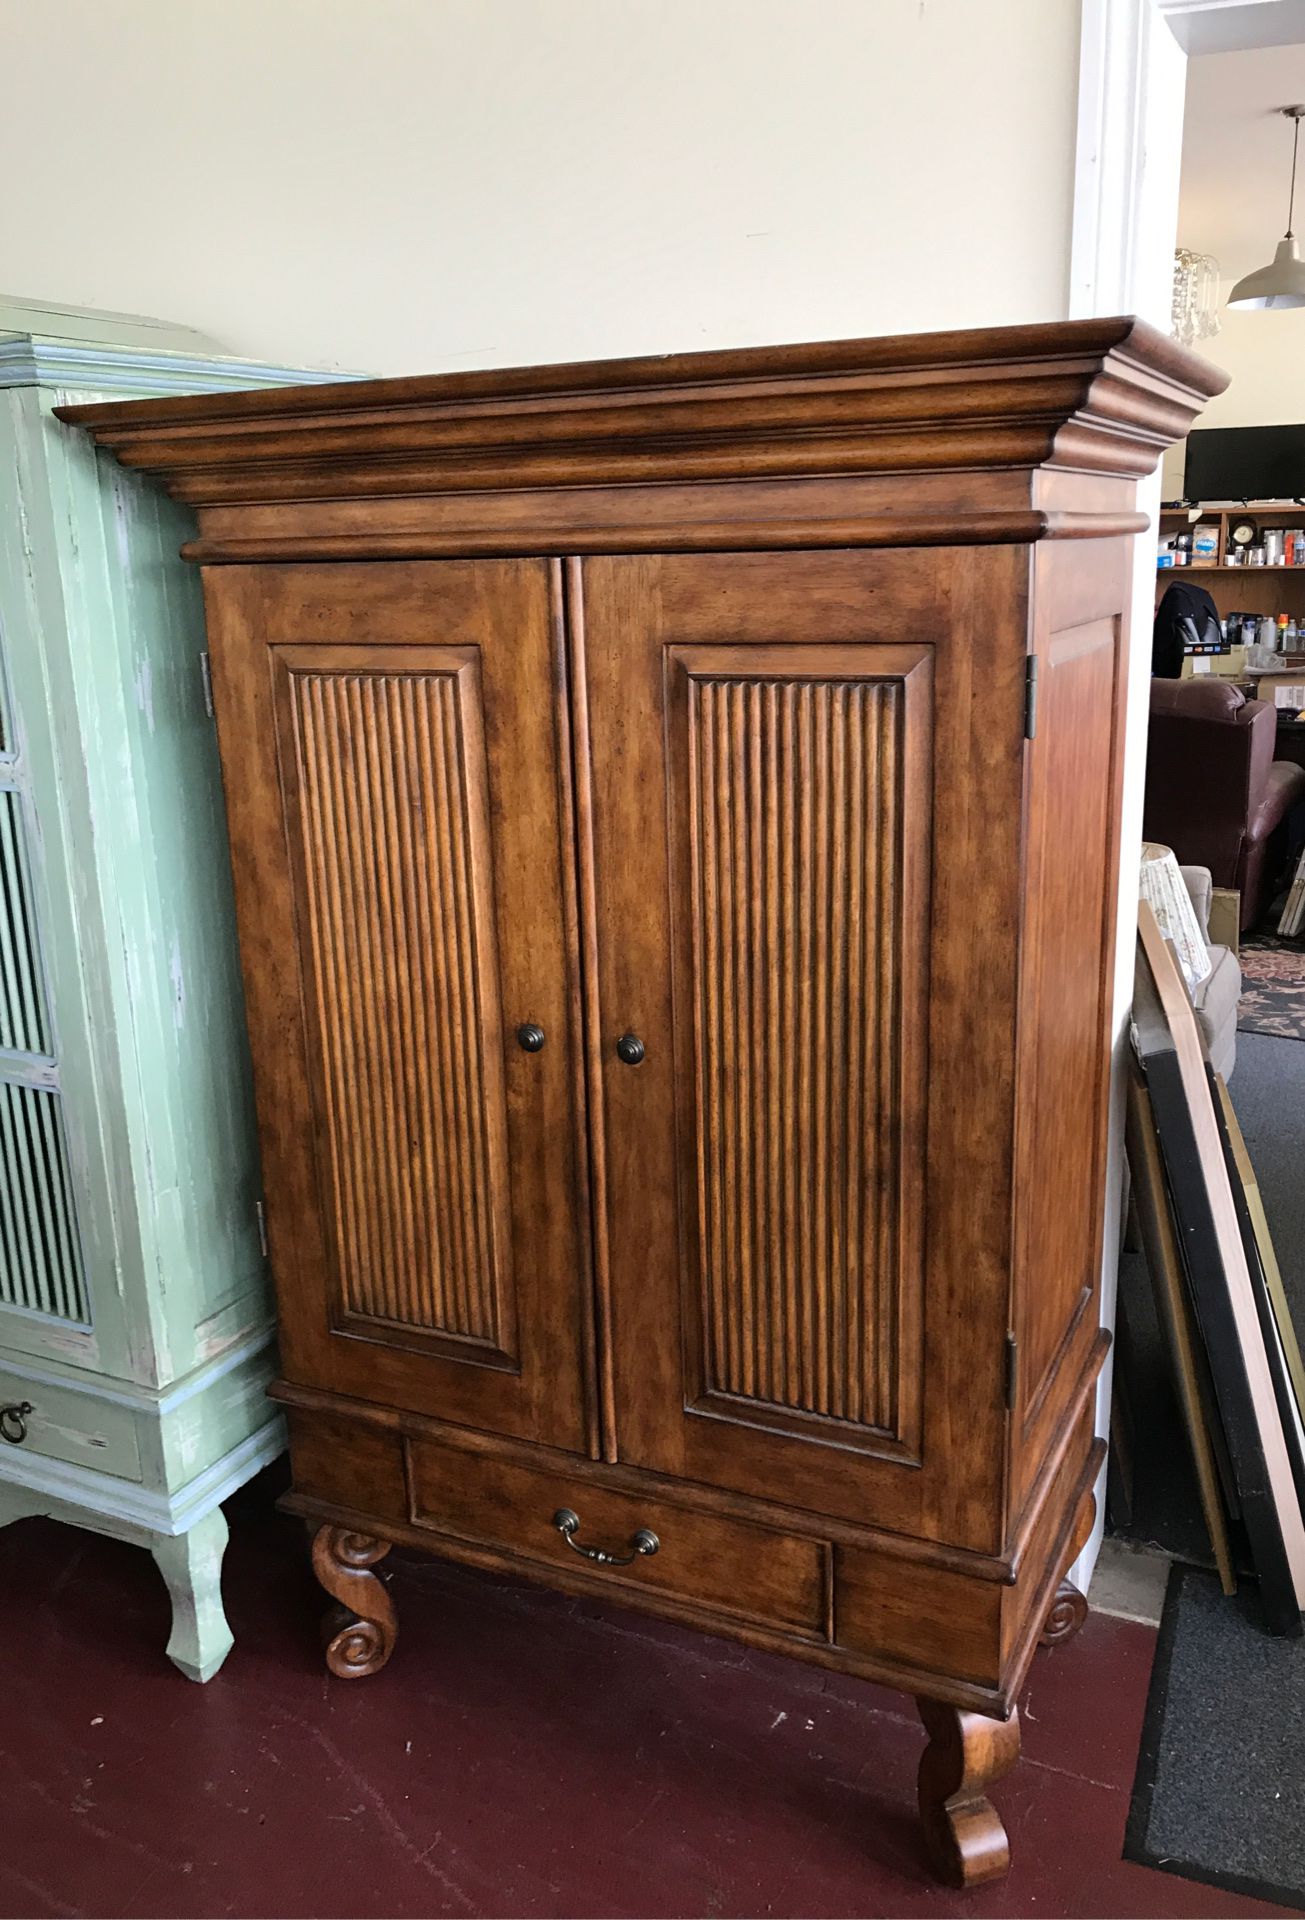 Real nice solid wood clothes armoire or TV armoire has three shelves lots of storage